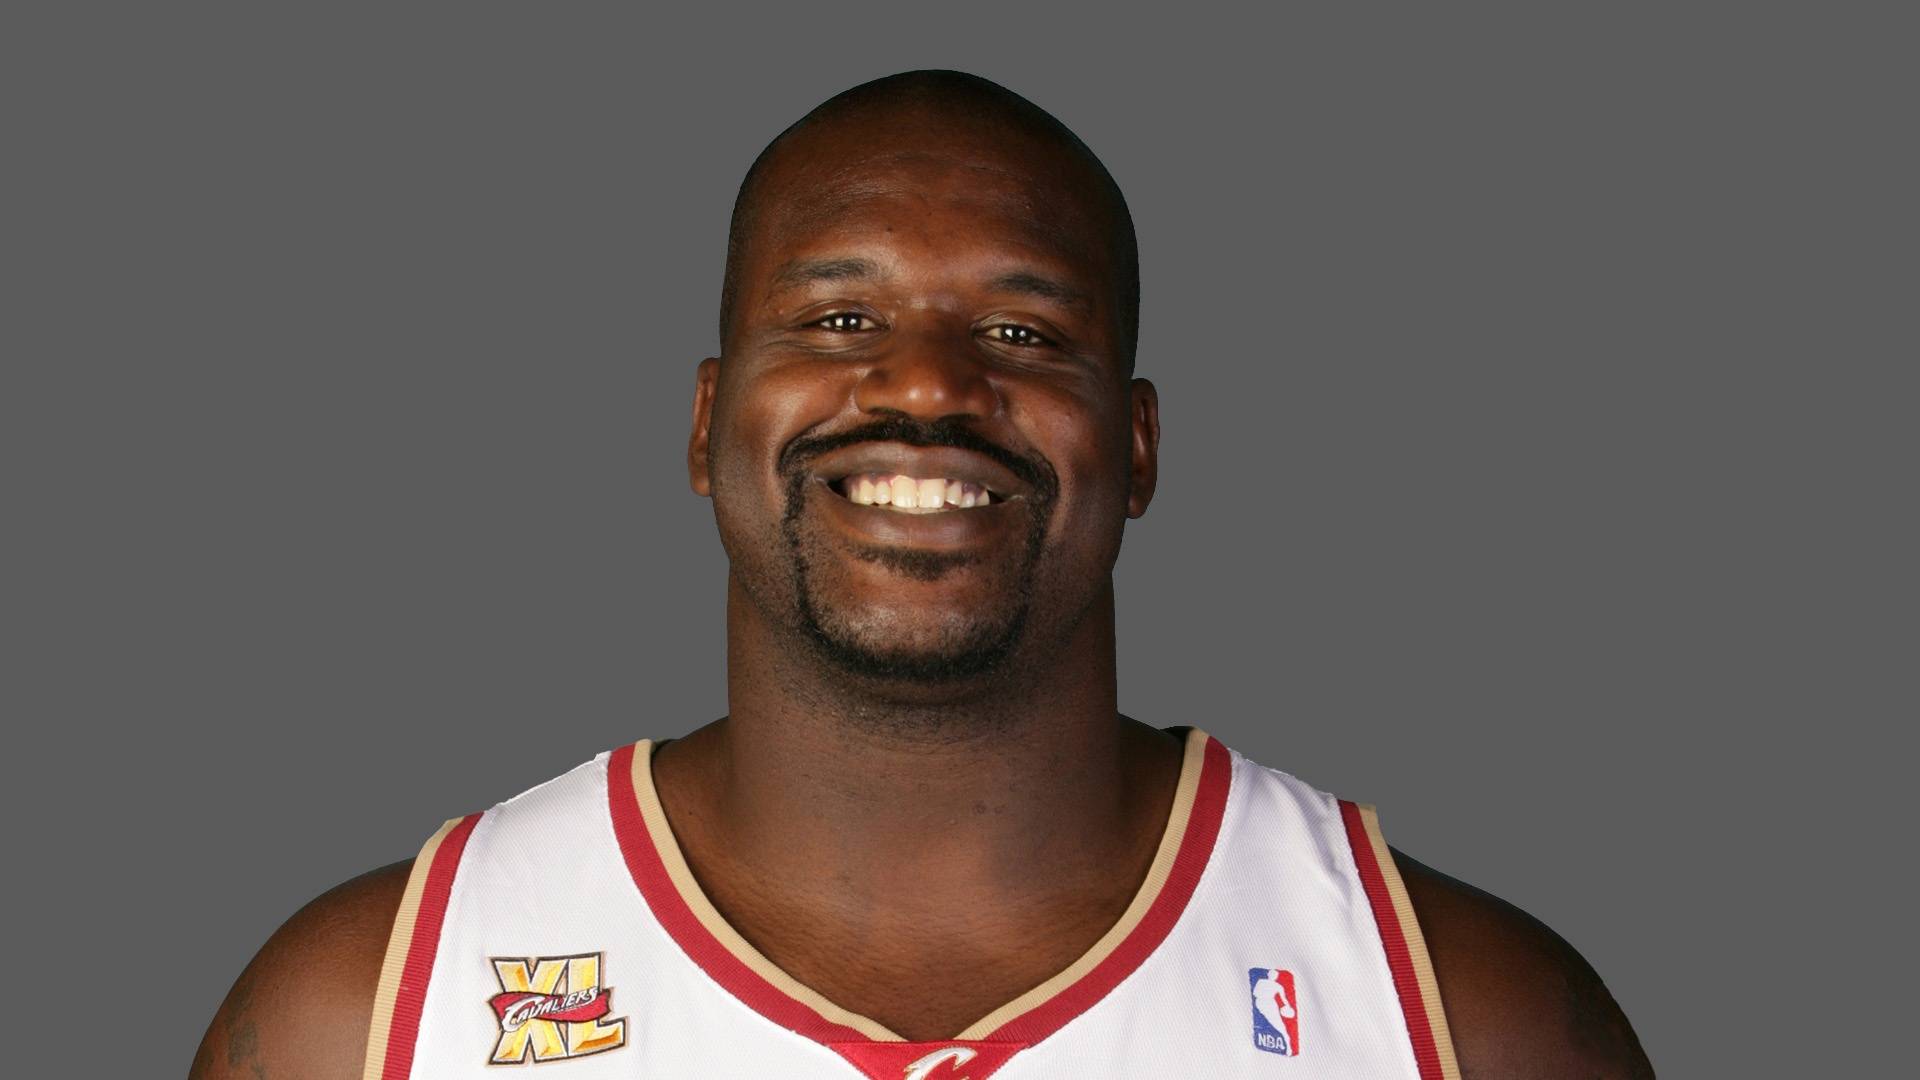 1920x1080px Shaquille O Neal (81.87 KB).04.2015